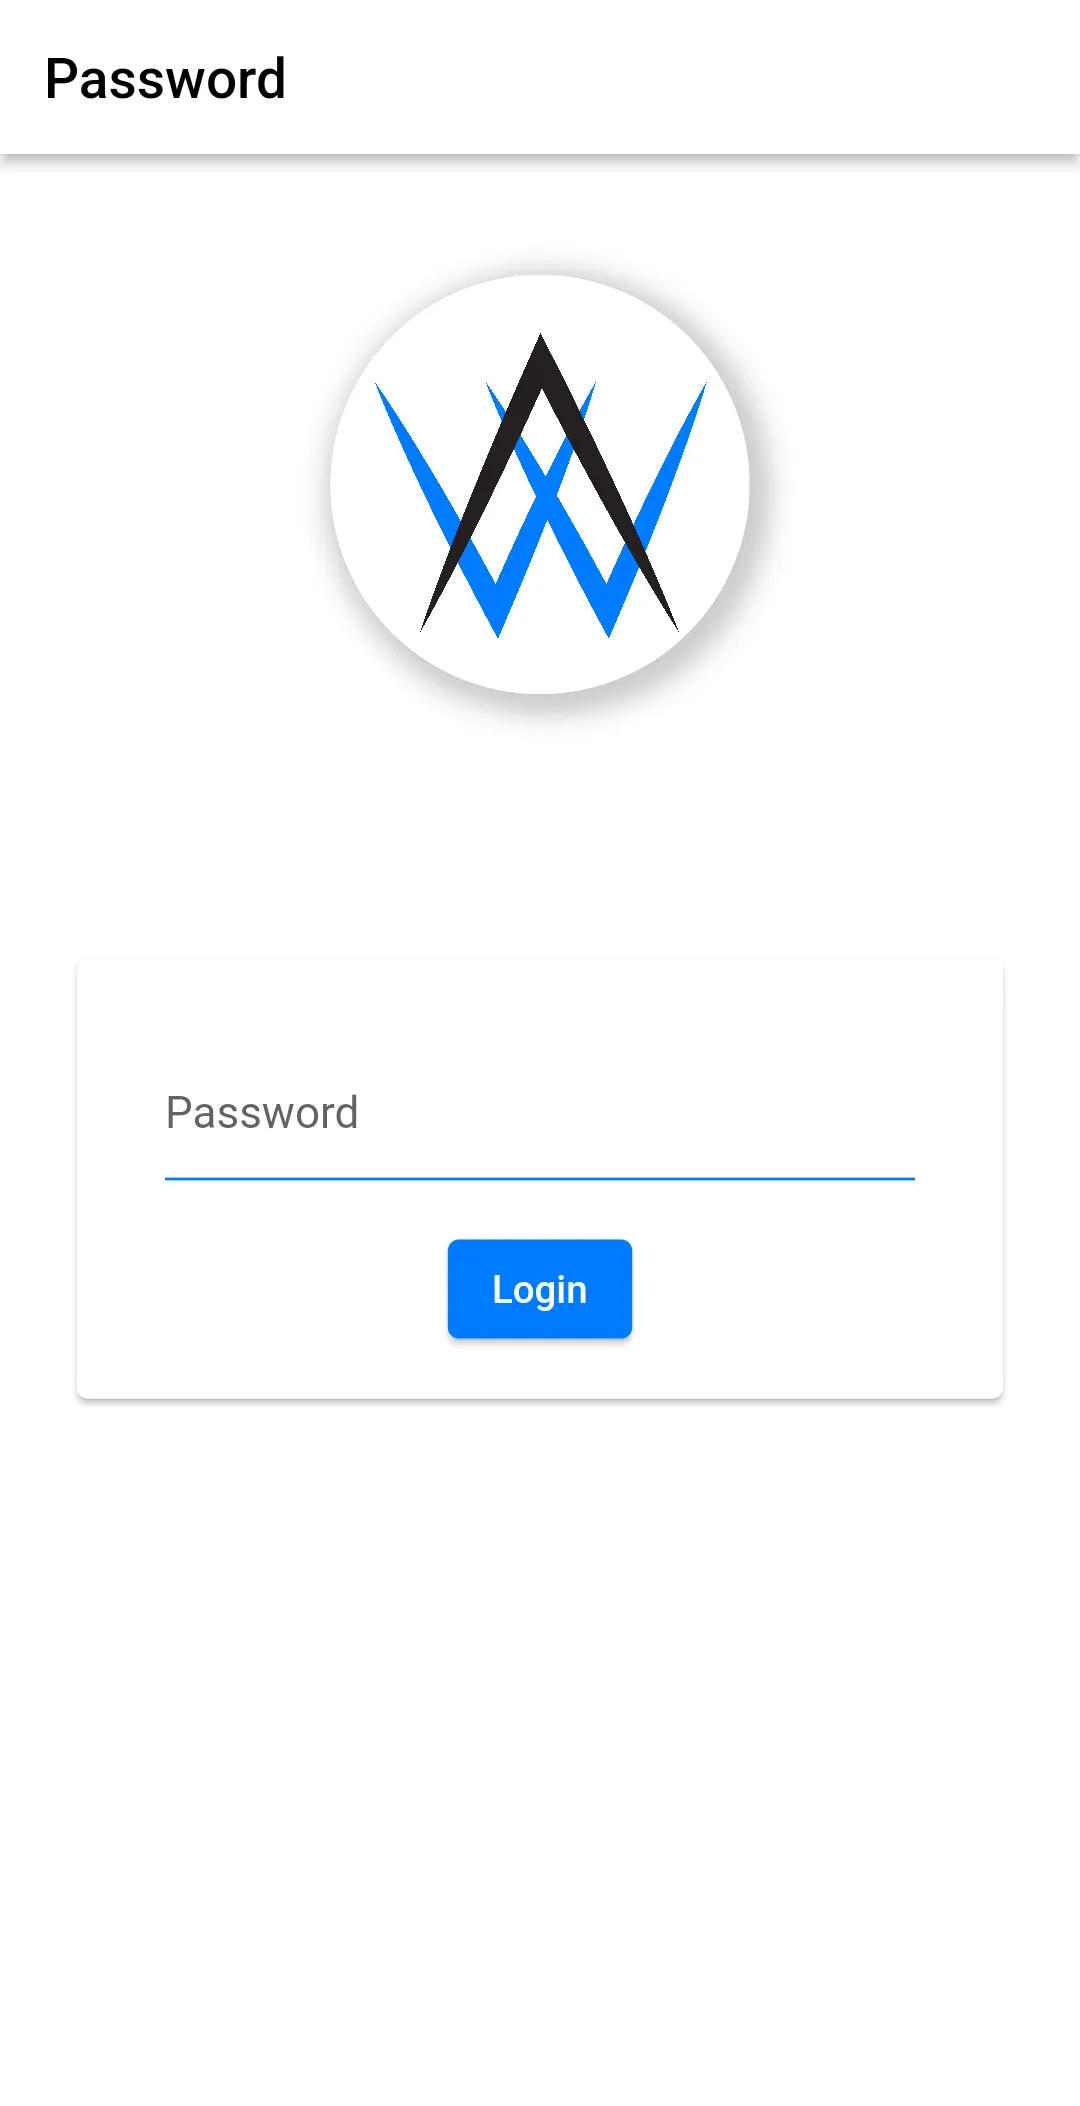 A screenshot of the app showing the password screen where the password needs to be entered.